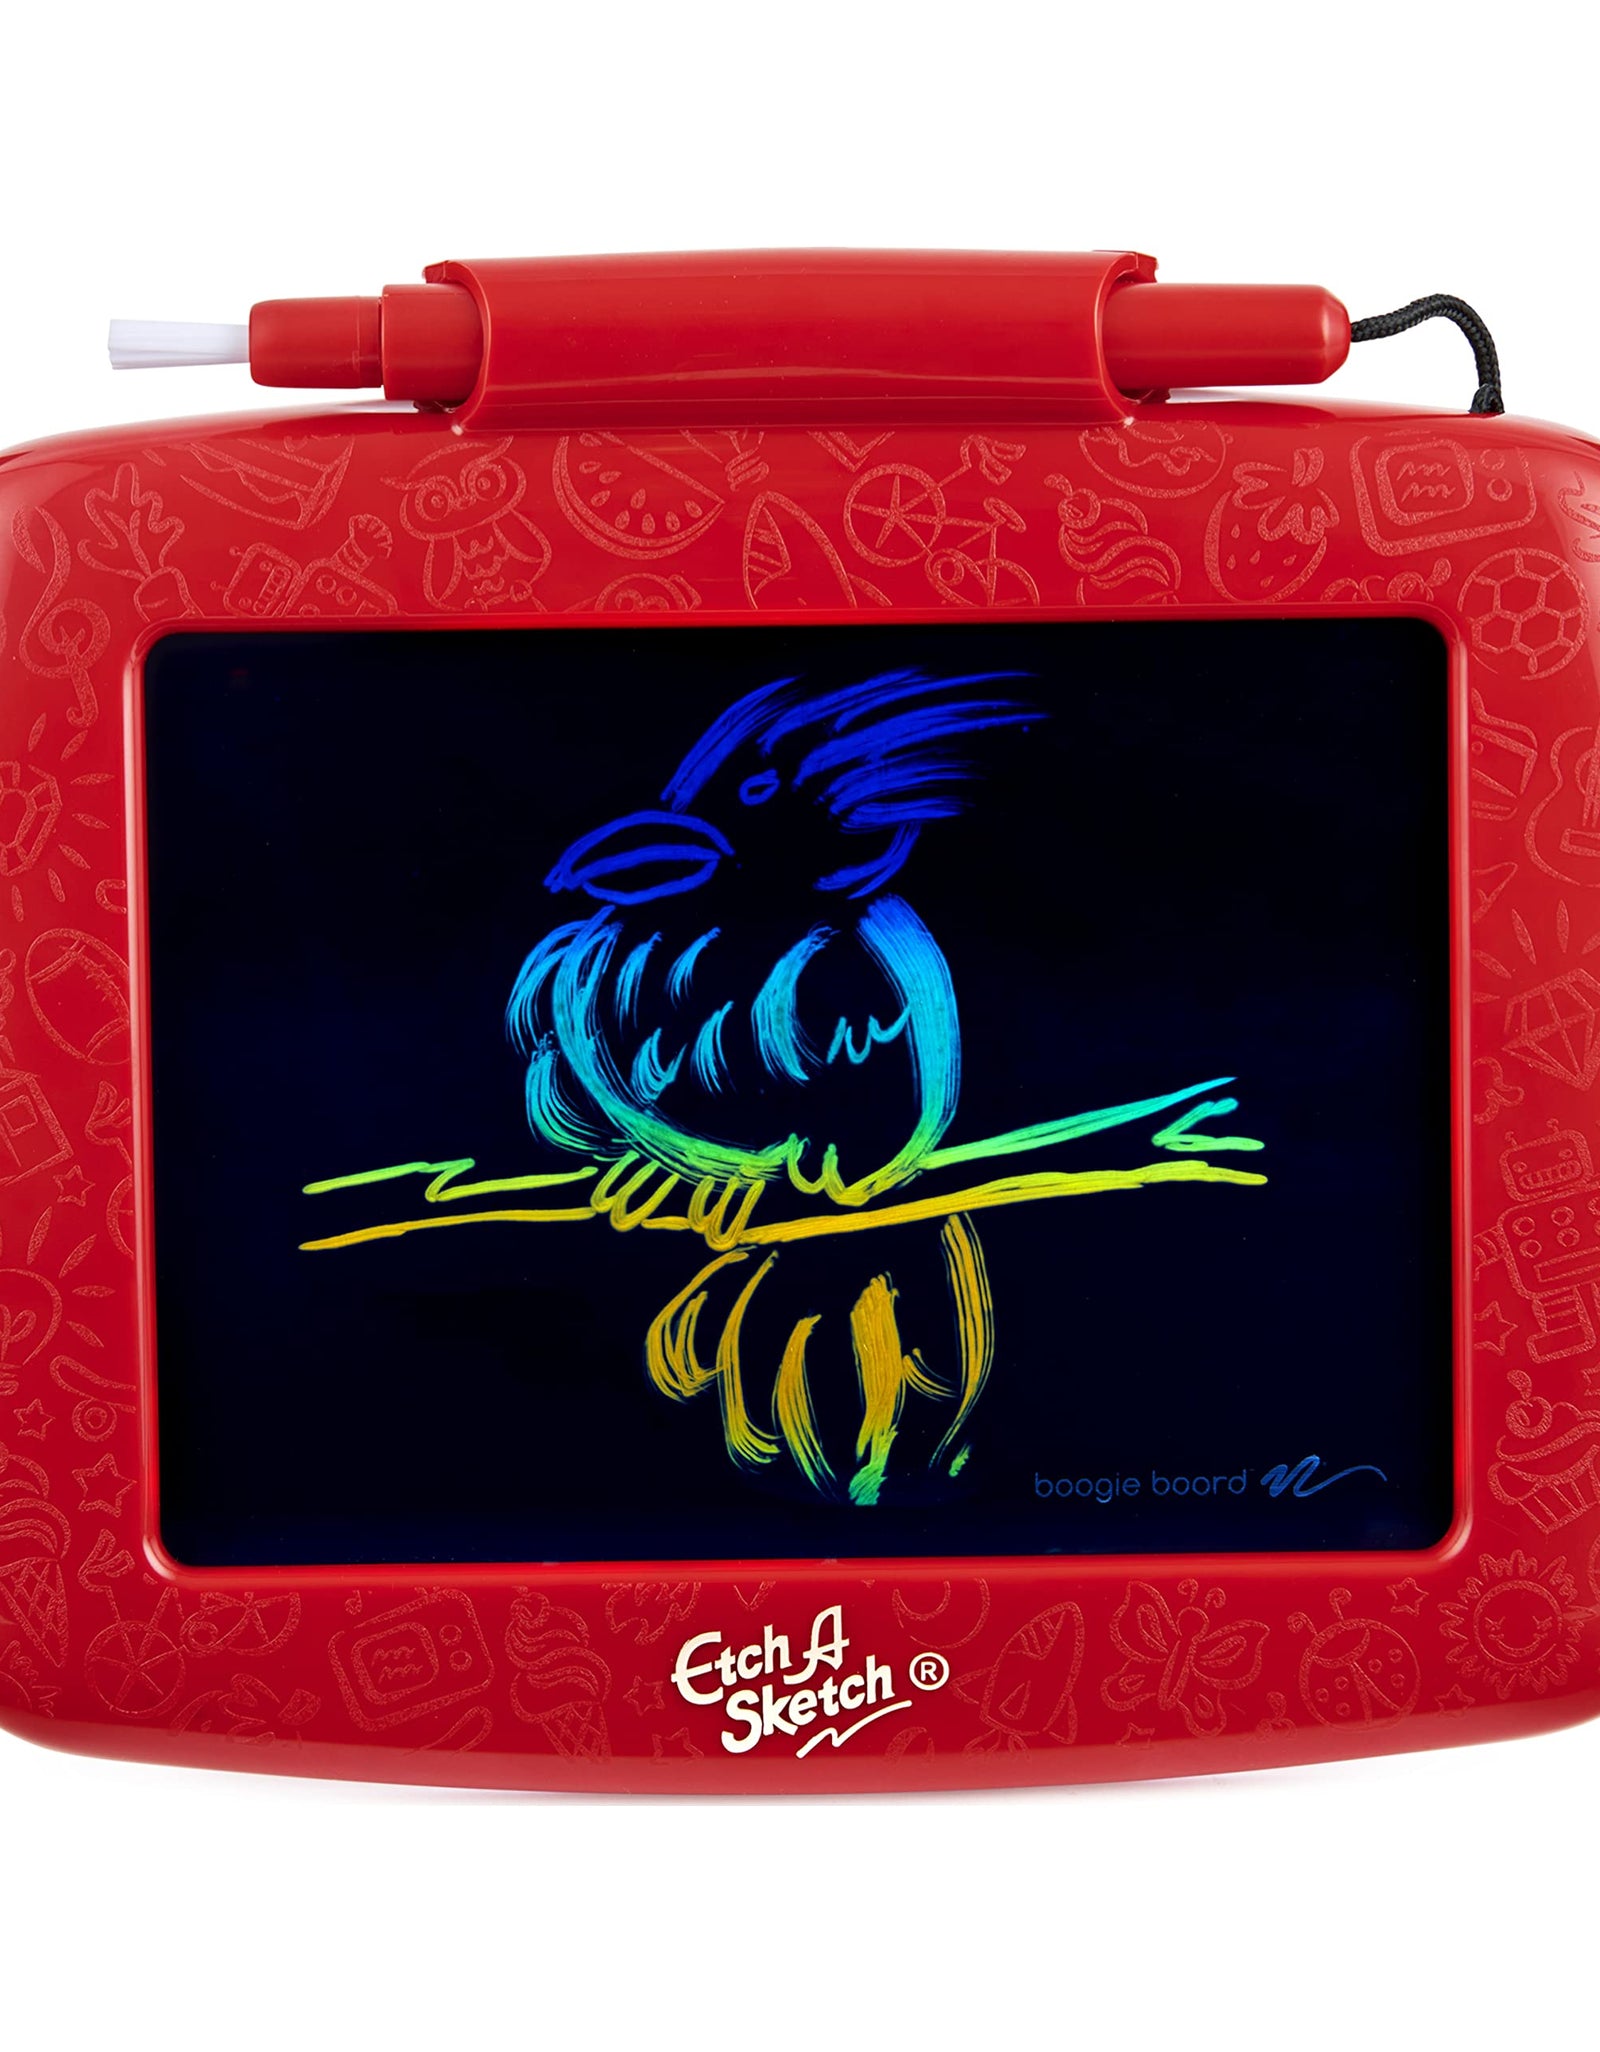 Etch A Sketch Freestyle, Drawing Tablet with 2-in-1 Stylus Pen and Paintbrush, Magic Screen, Kids Toys for Ages 3 and up